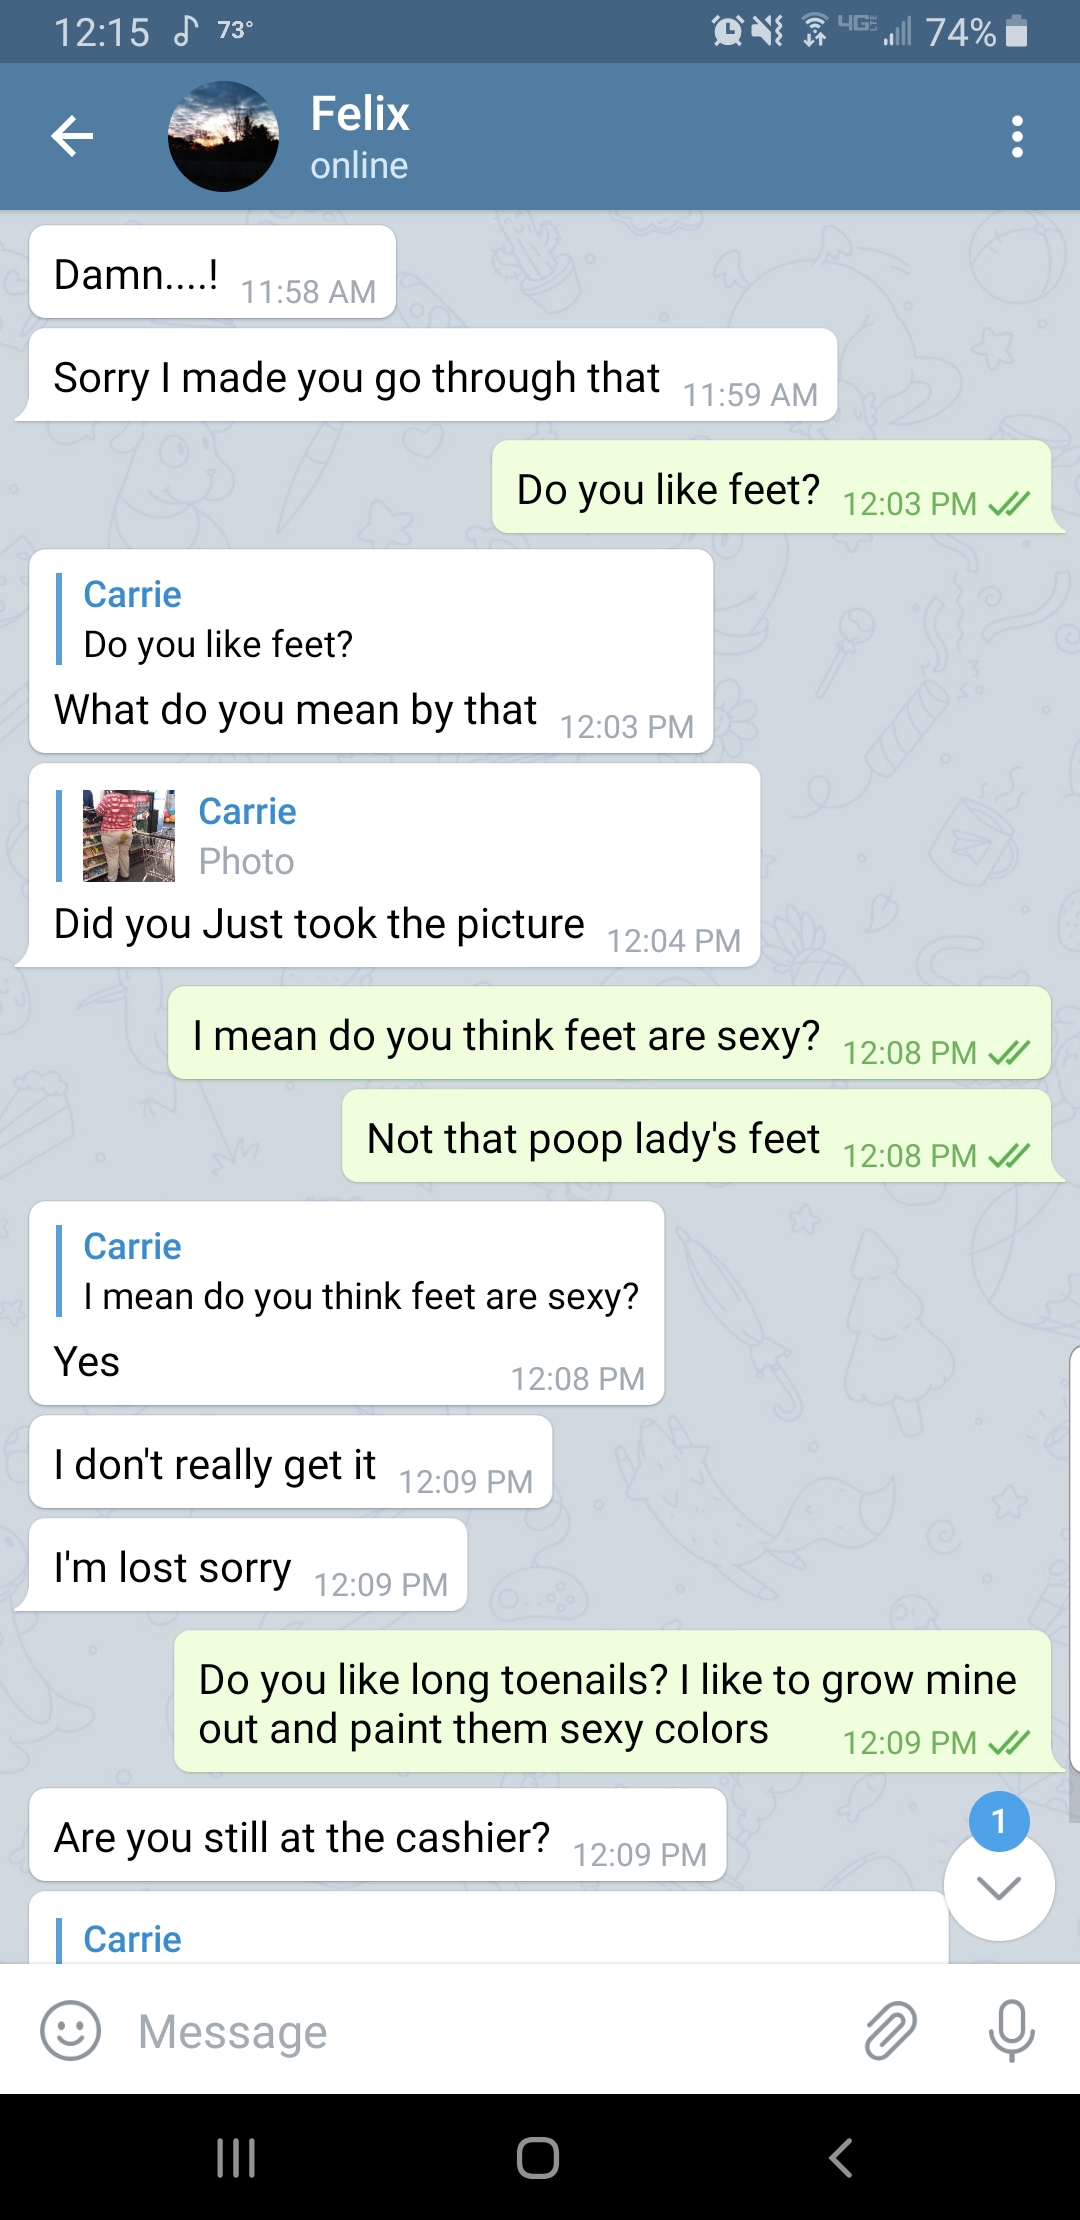 screenshot - 74% Felix online DamnTM Sorry I made you go through that Do you feet? 20 Pm Do you feet? What do you mean by that 20 Pm Carrie Did you just took the picture 202 Pm I mean do you think feet are sexy? 208 Pm Not that poop lady's feet 208 Pm I m